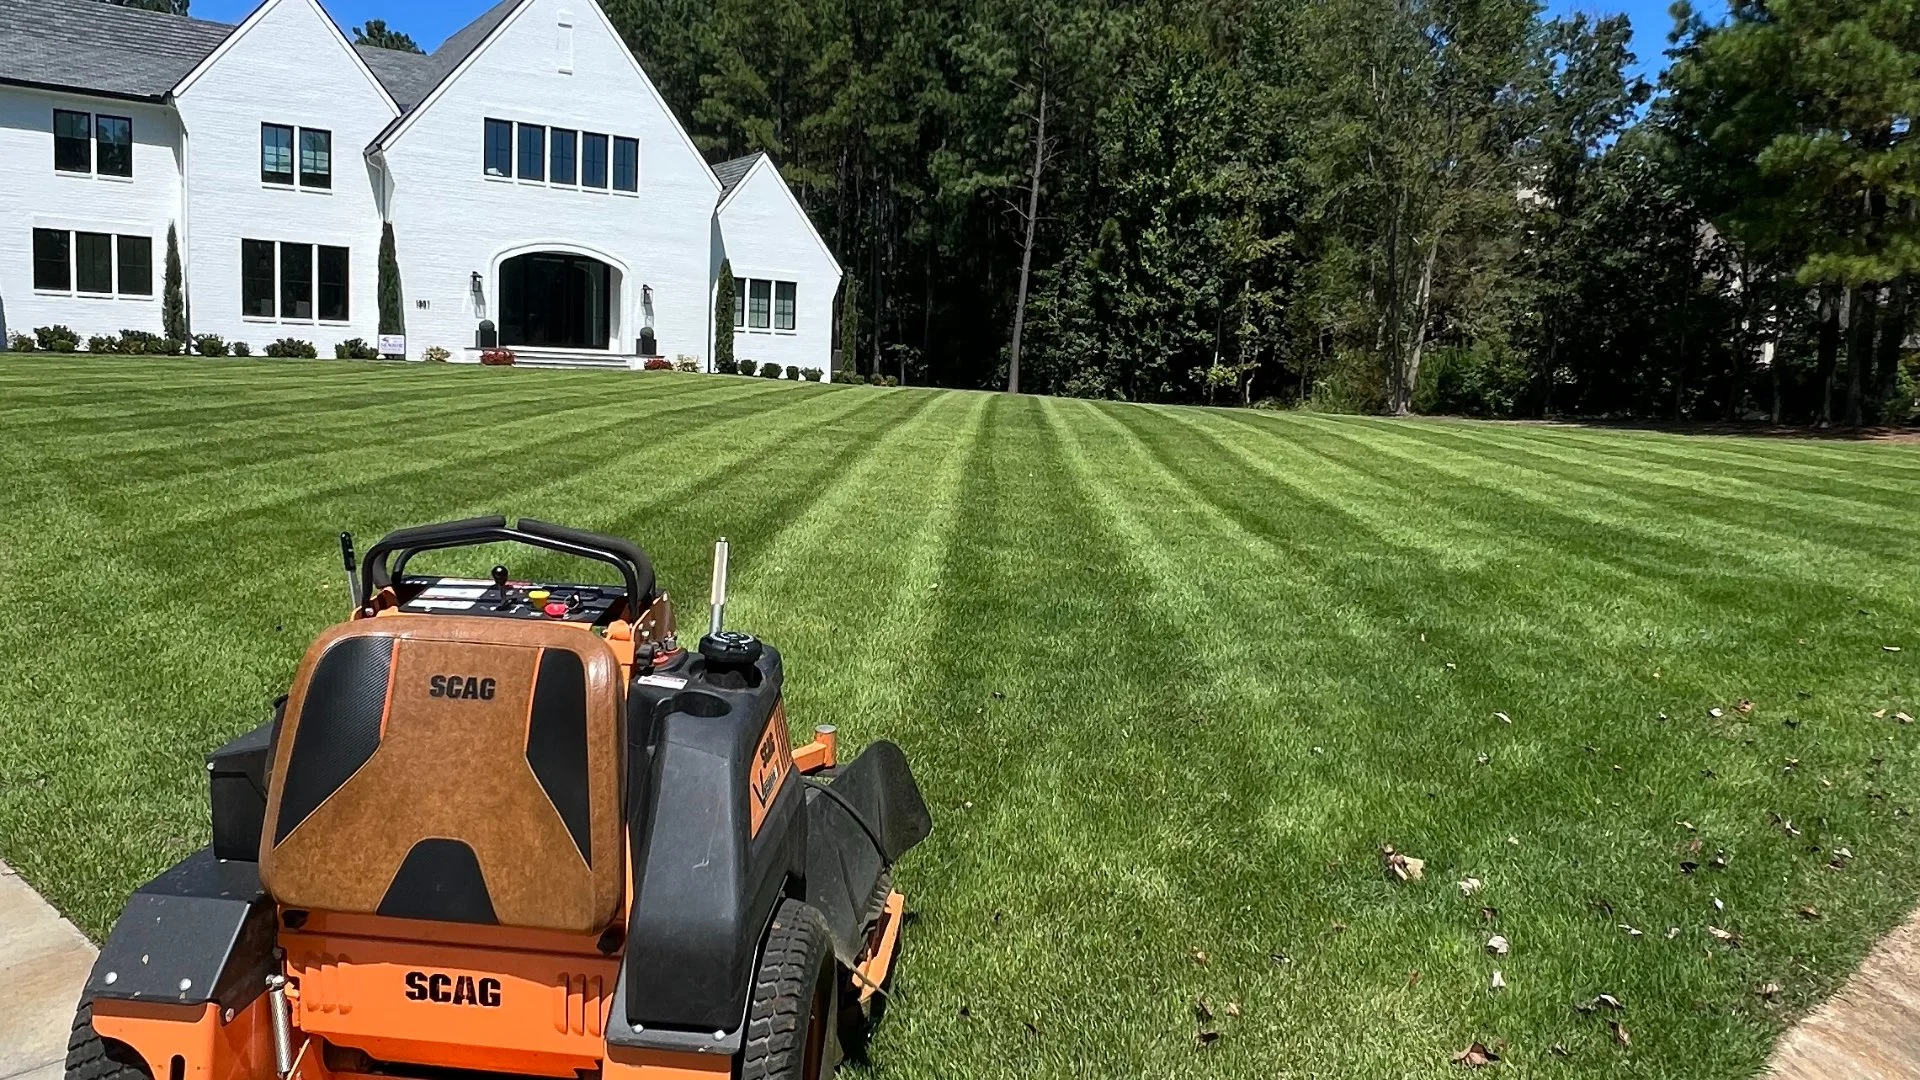 Should You Bag Your Grass Clippings While Mowing or Leave Them on Your Lawn?